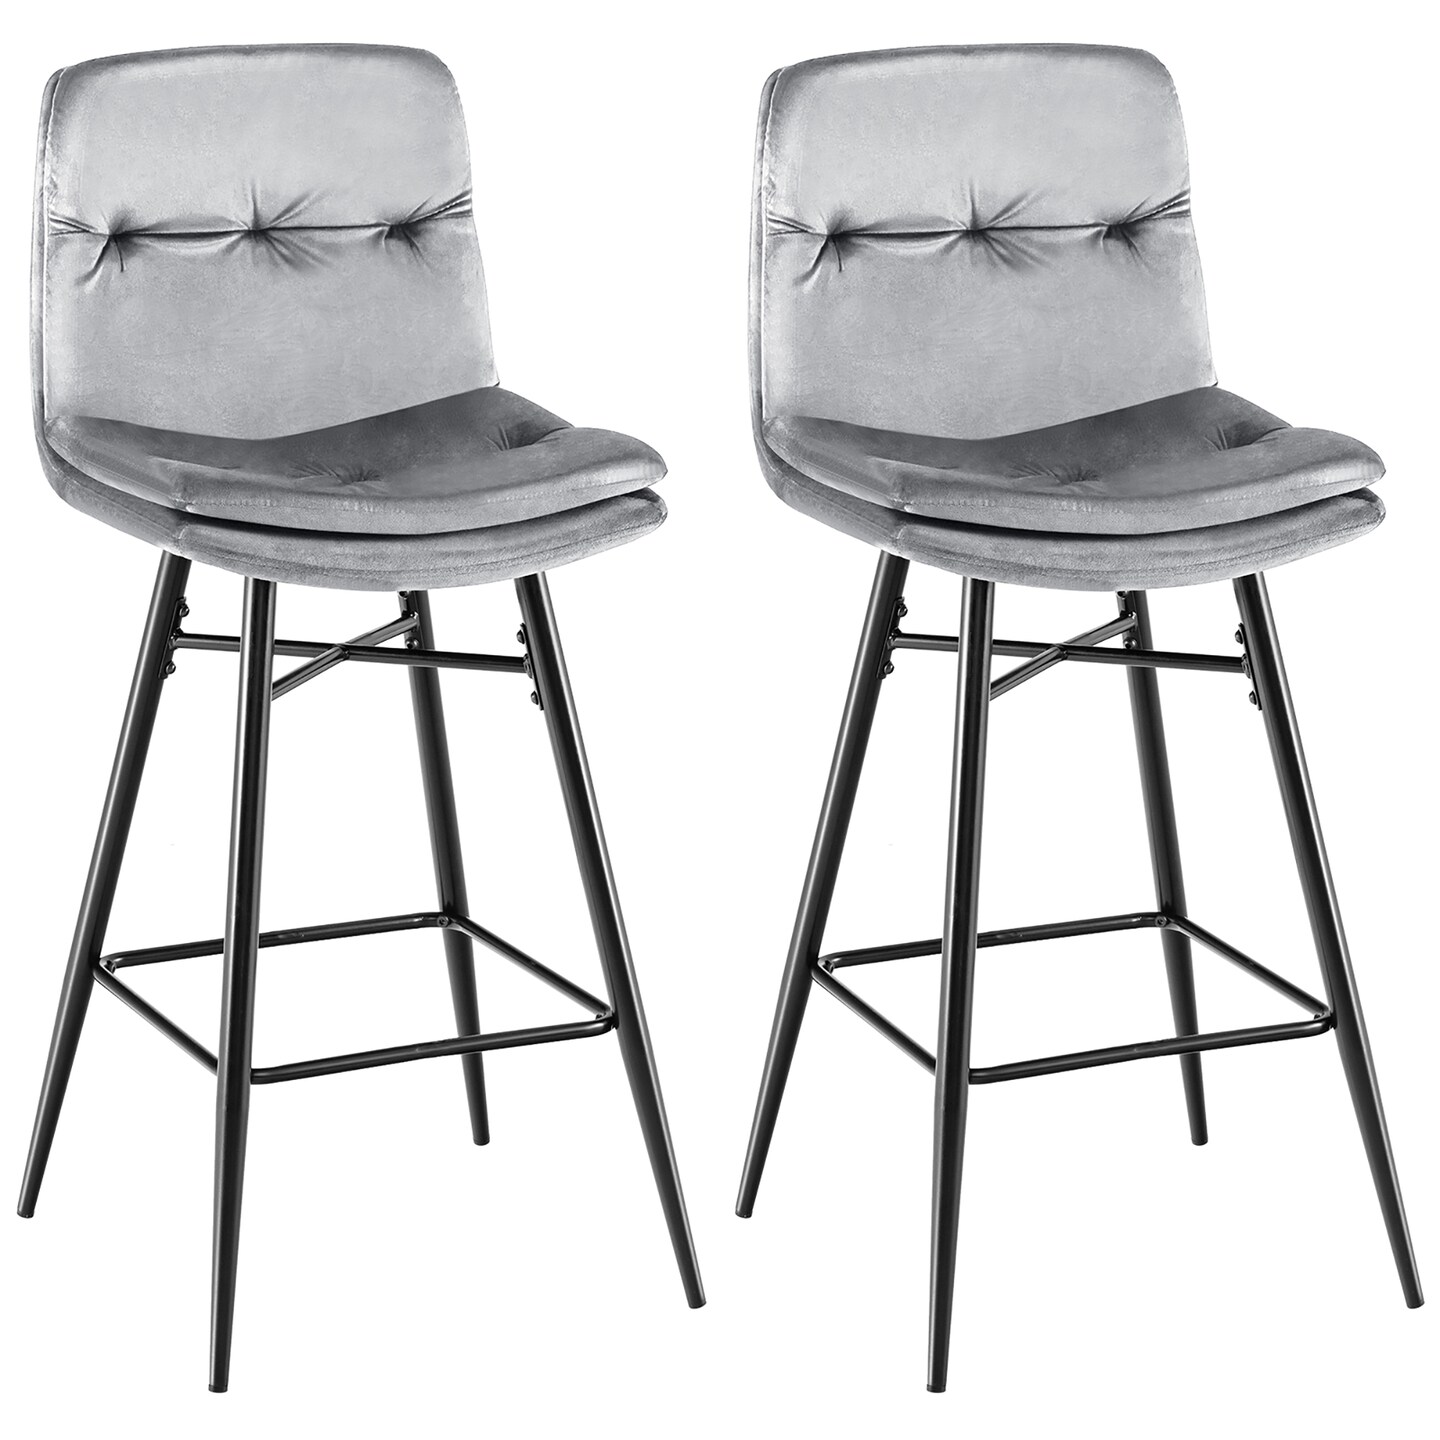 Costway Set of 2 Velvet Bar Stools Bar Height Kitchen Dining Chairs with Metal Legs Blue/Grey